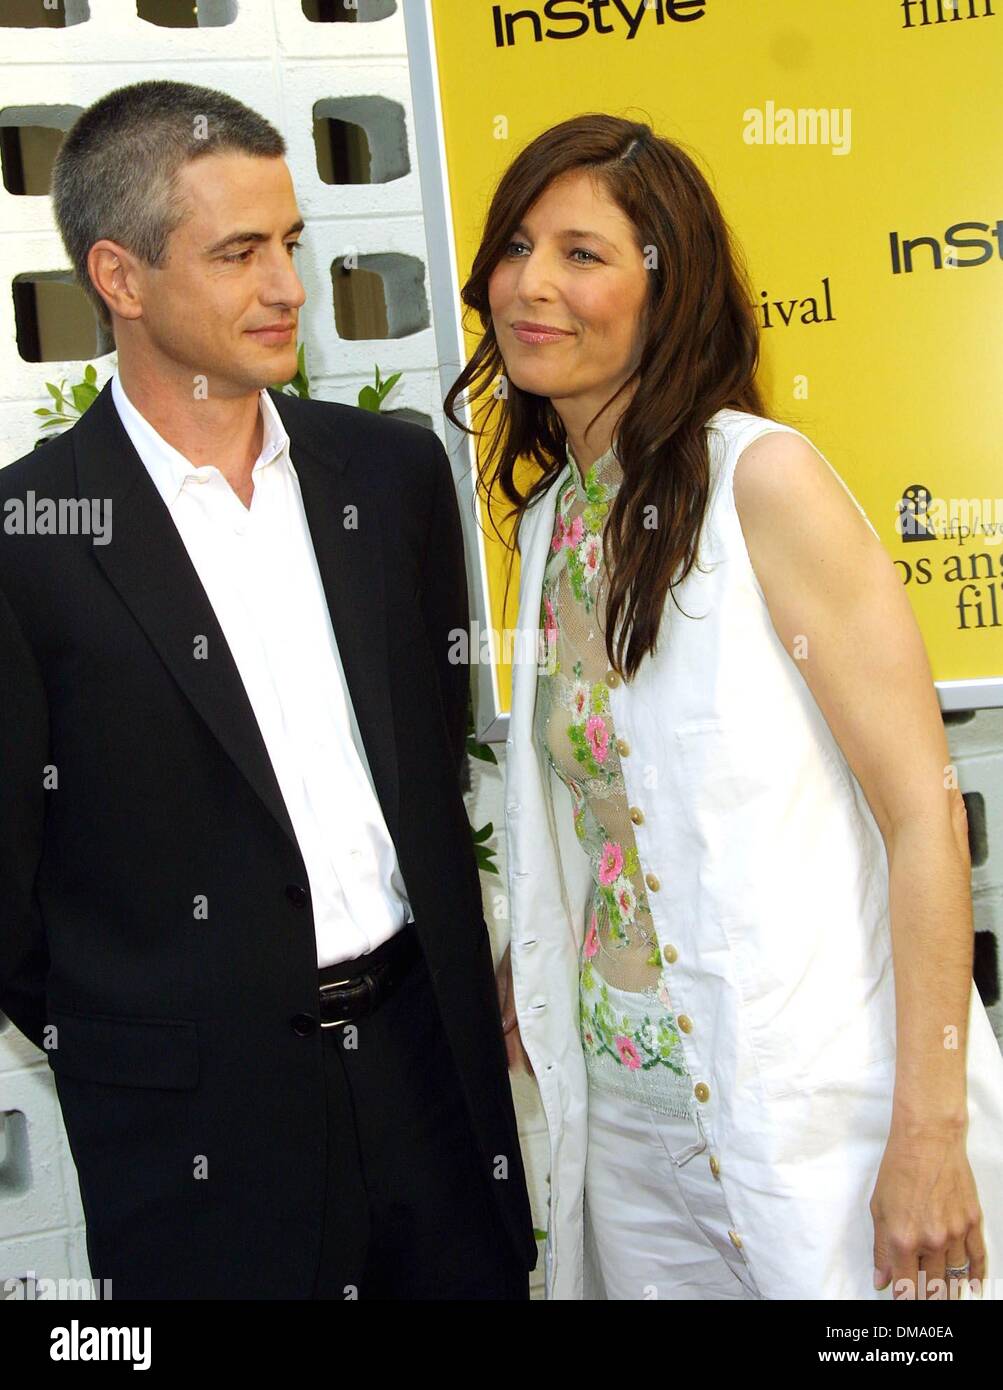 June 21, 2002 - Hollywood, CALIFORNIA, USA - DERMOT MULRONEY AND HIS WIFE CATHERINE KEENER..LOS ANGELES FILM FESTIVAL.'LOVELY & AMAZING' - PREMIERE.ARCLIGHT THEATER, HOLLYWOOD, CA.JUNE 20, 2002. NINA PROMMER/   2002 K25353NP(Credit Image: © Globe Photos/ZUMAPRESS.com) Stock Photo